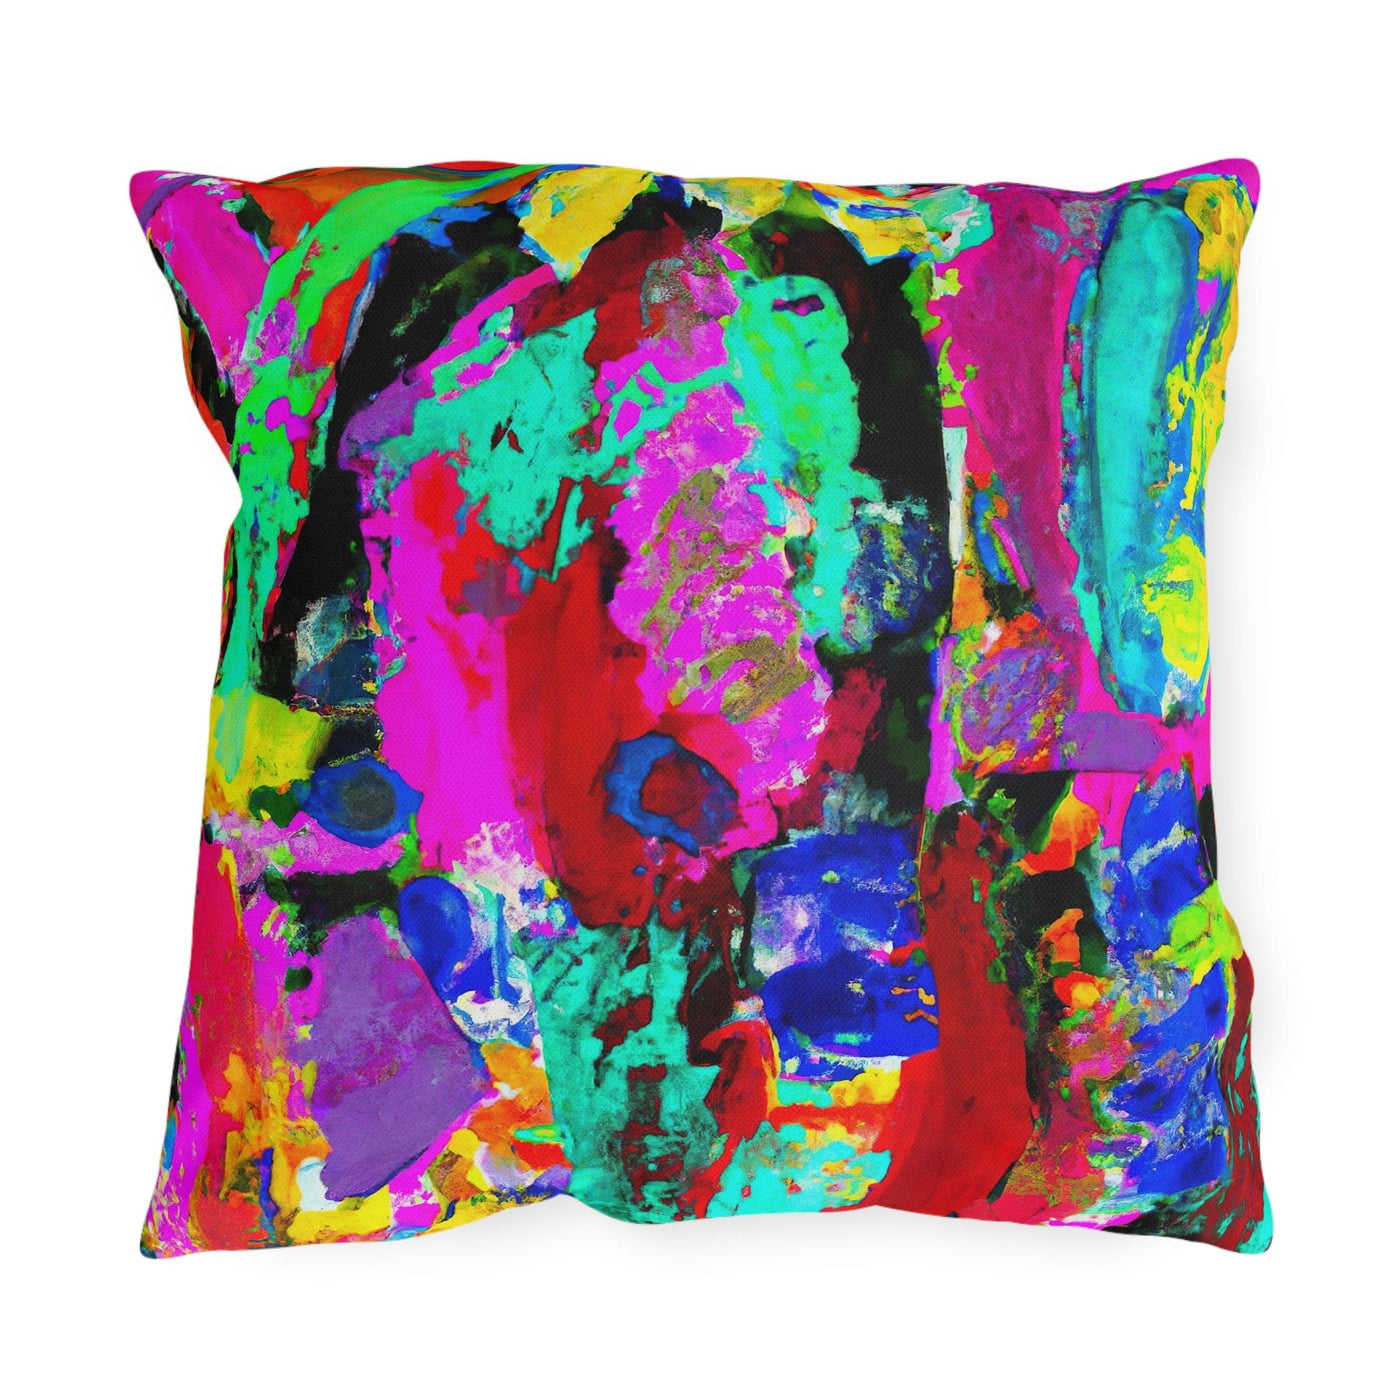 Decorative Outdoor Pillows With Zipper - Set Of 2 Multicolor Abstract